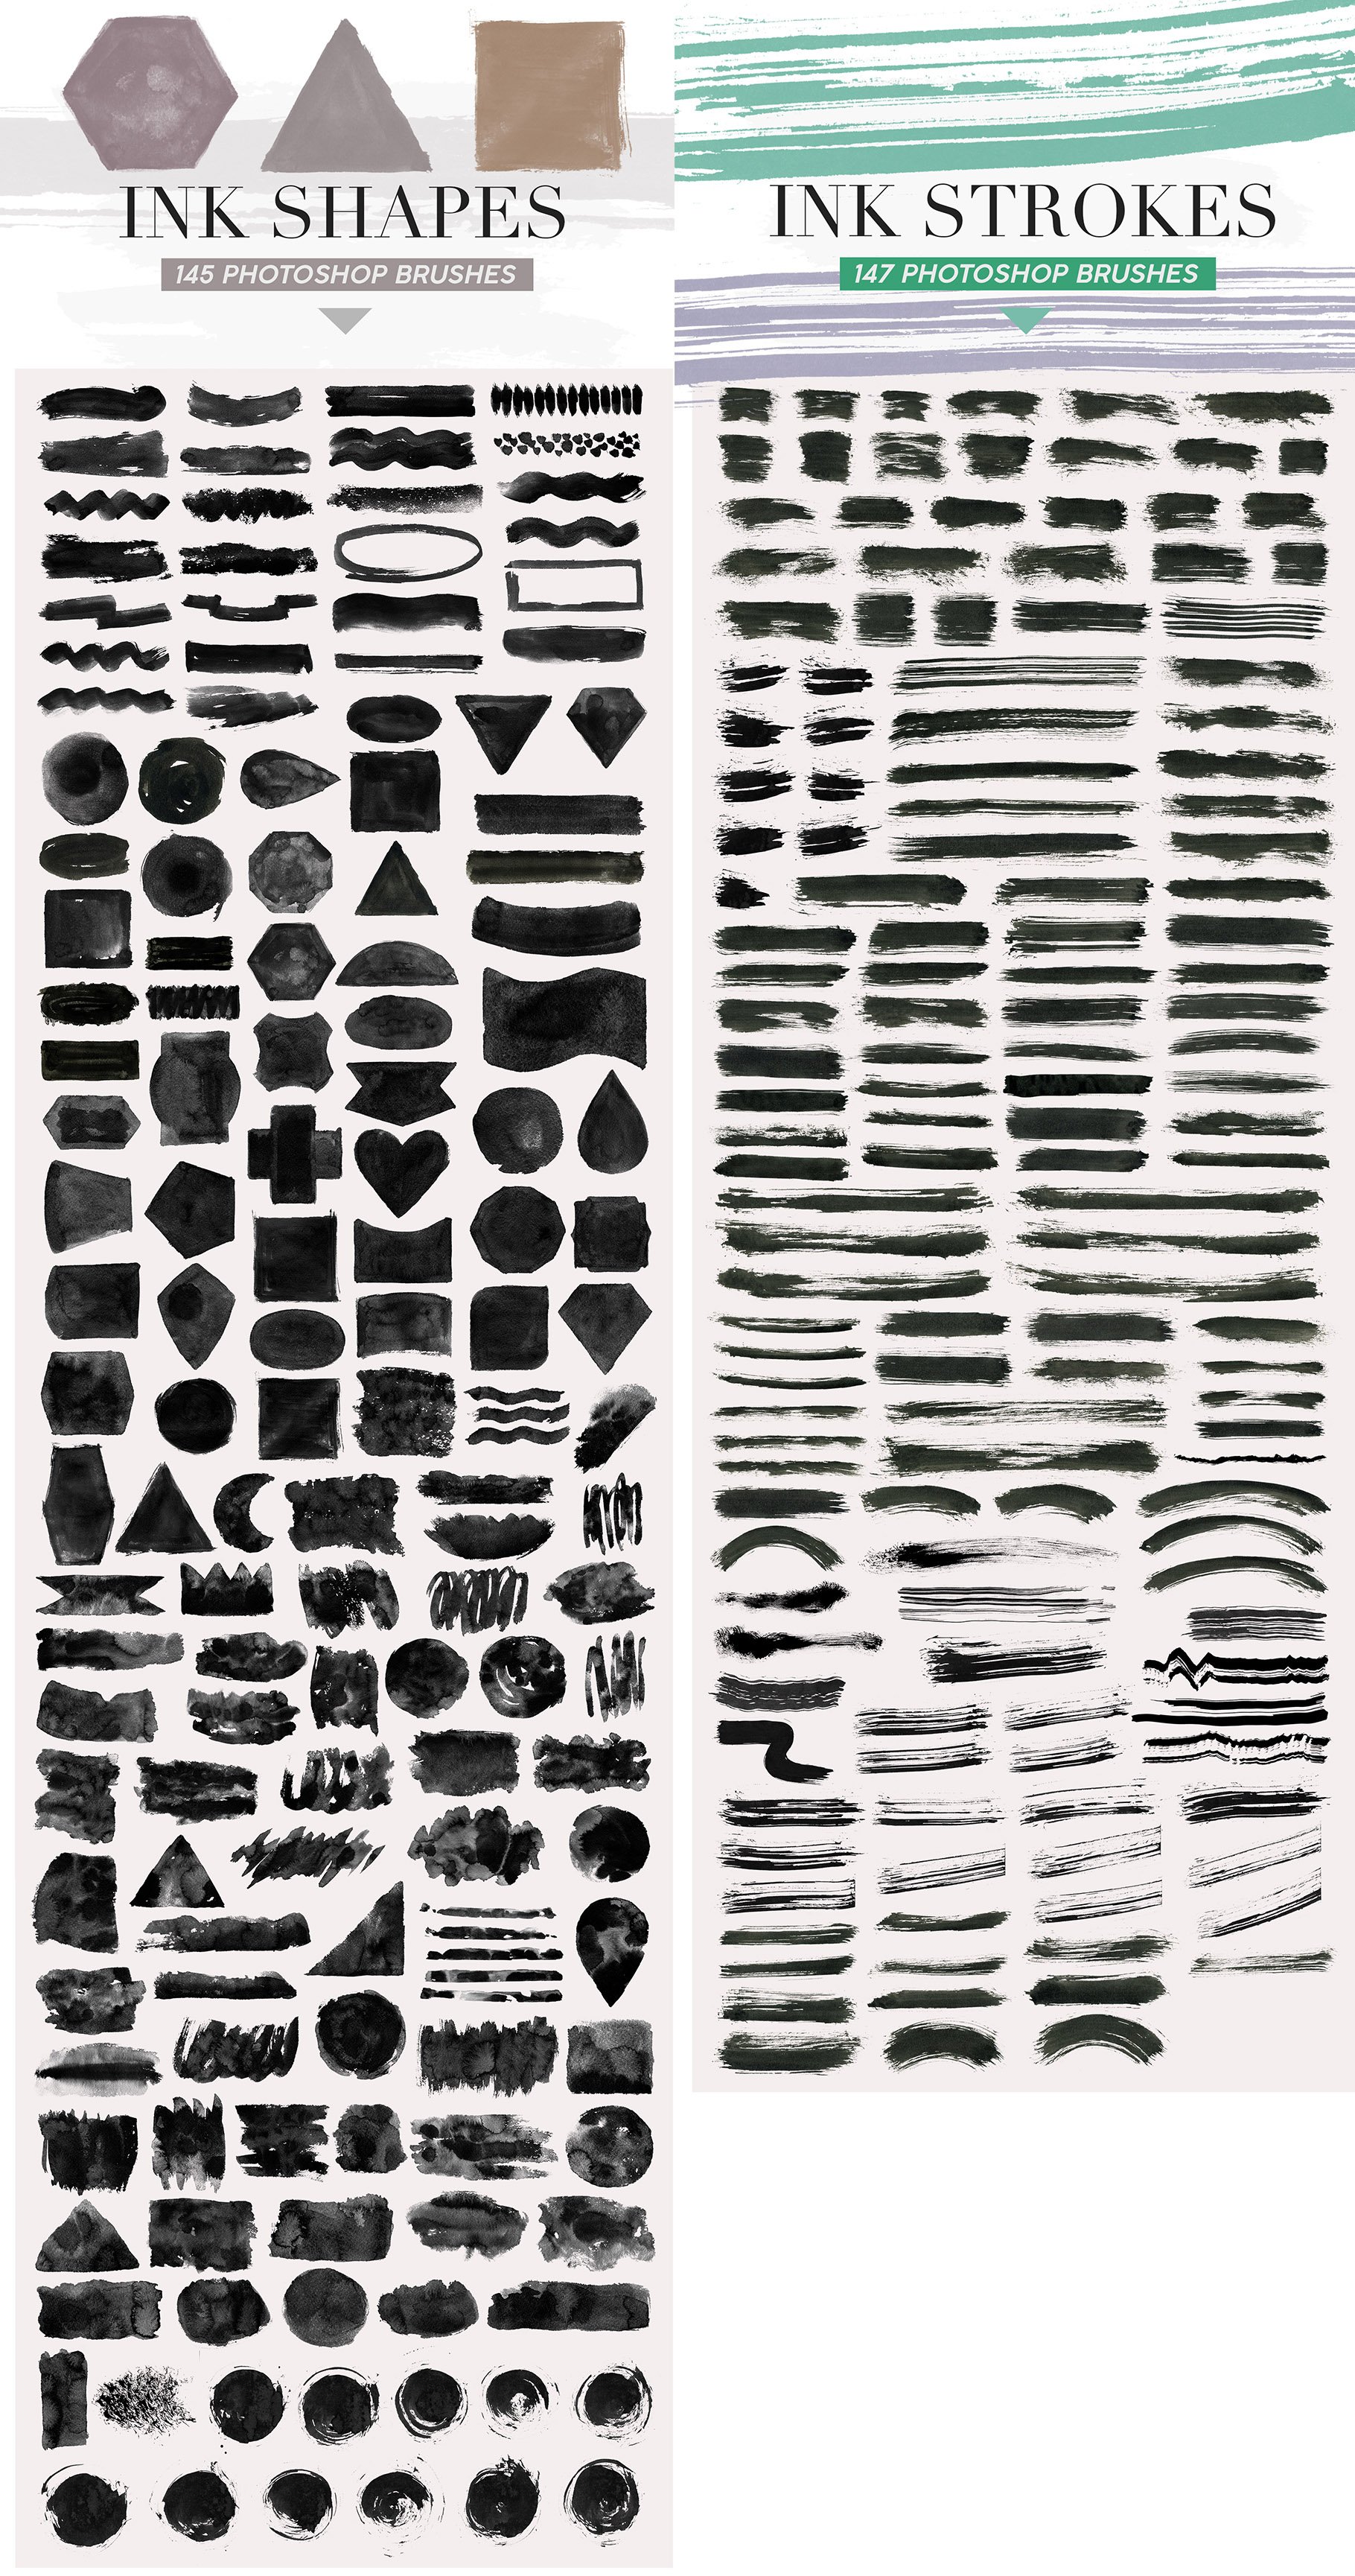 487 ink brushes 2 217